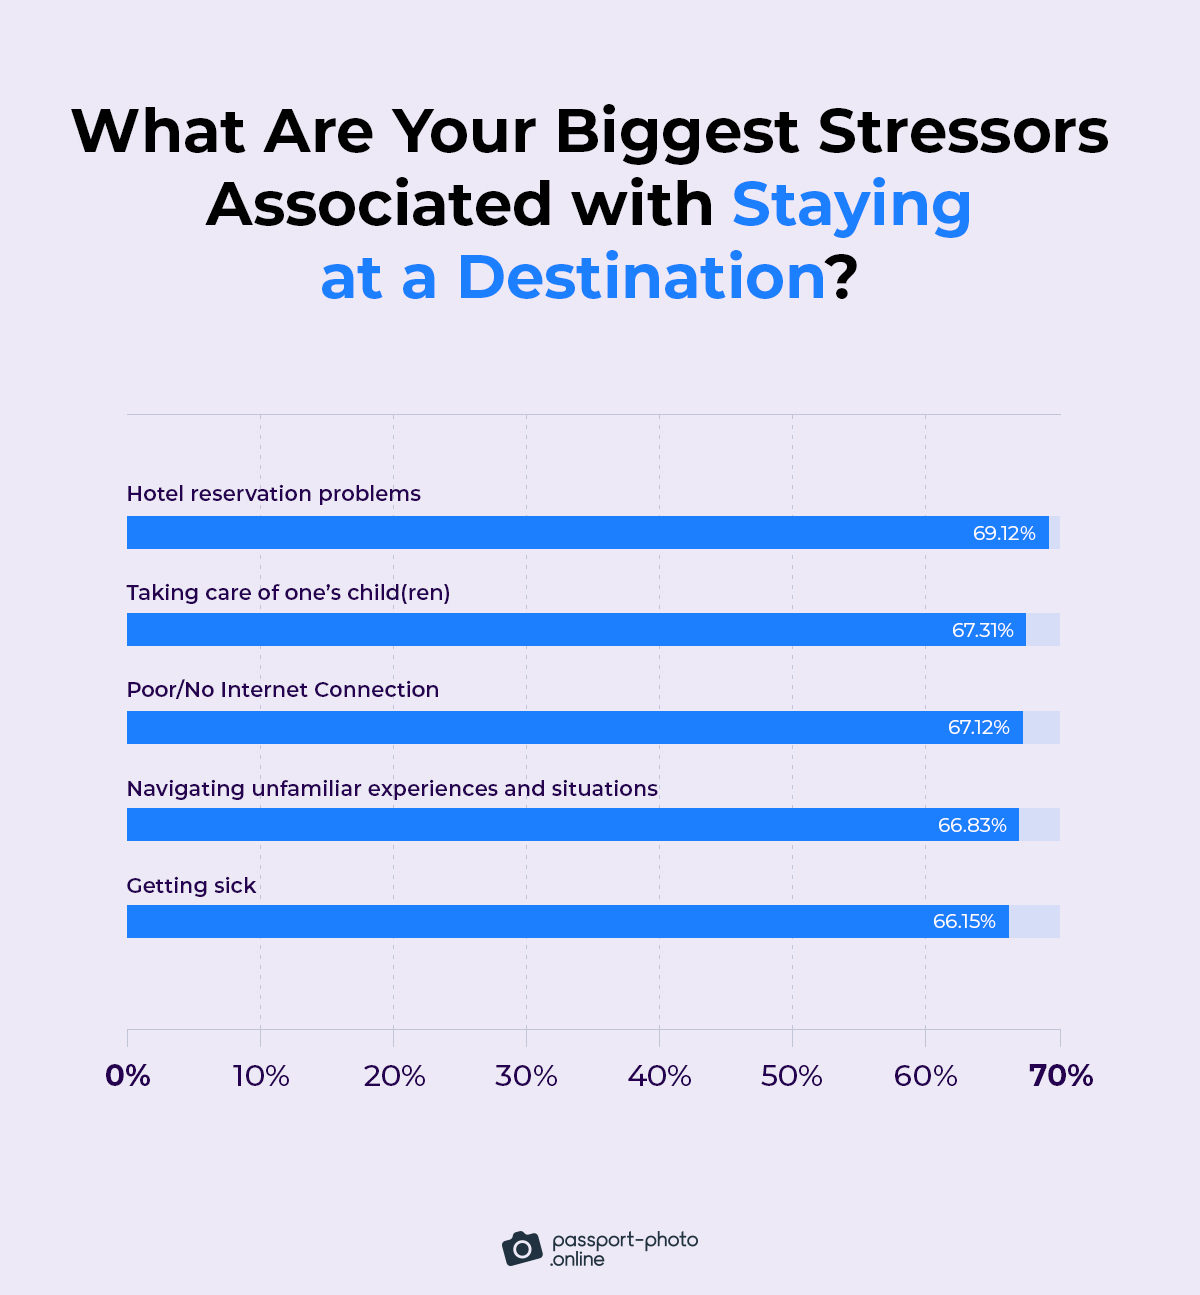 hotel reservation problems are the most stressful (69.12%) part associated with staying at a destination